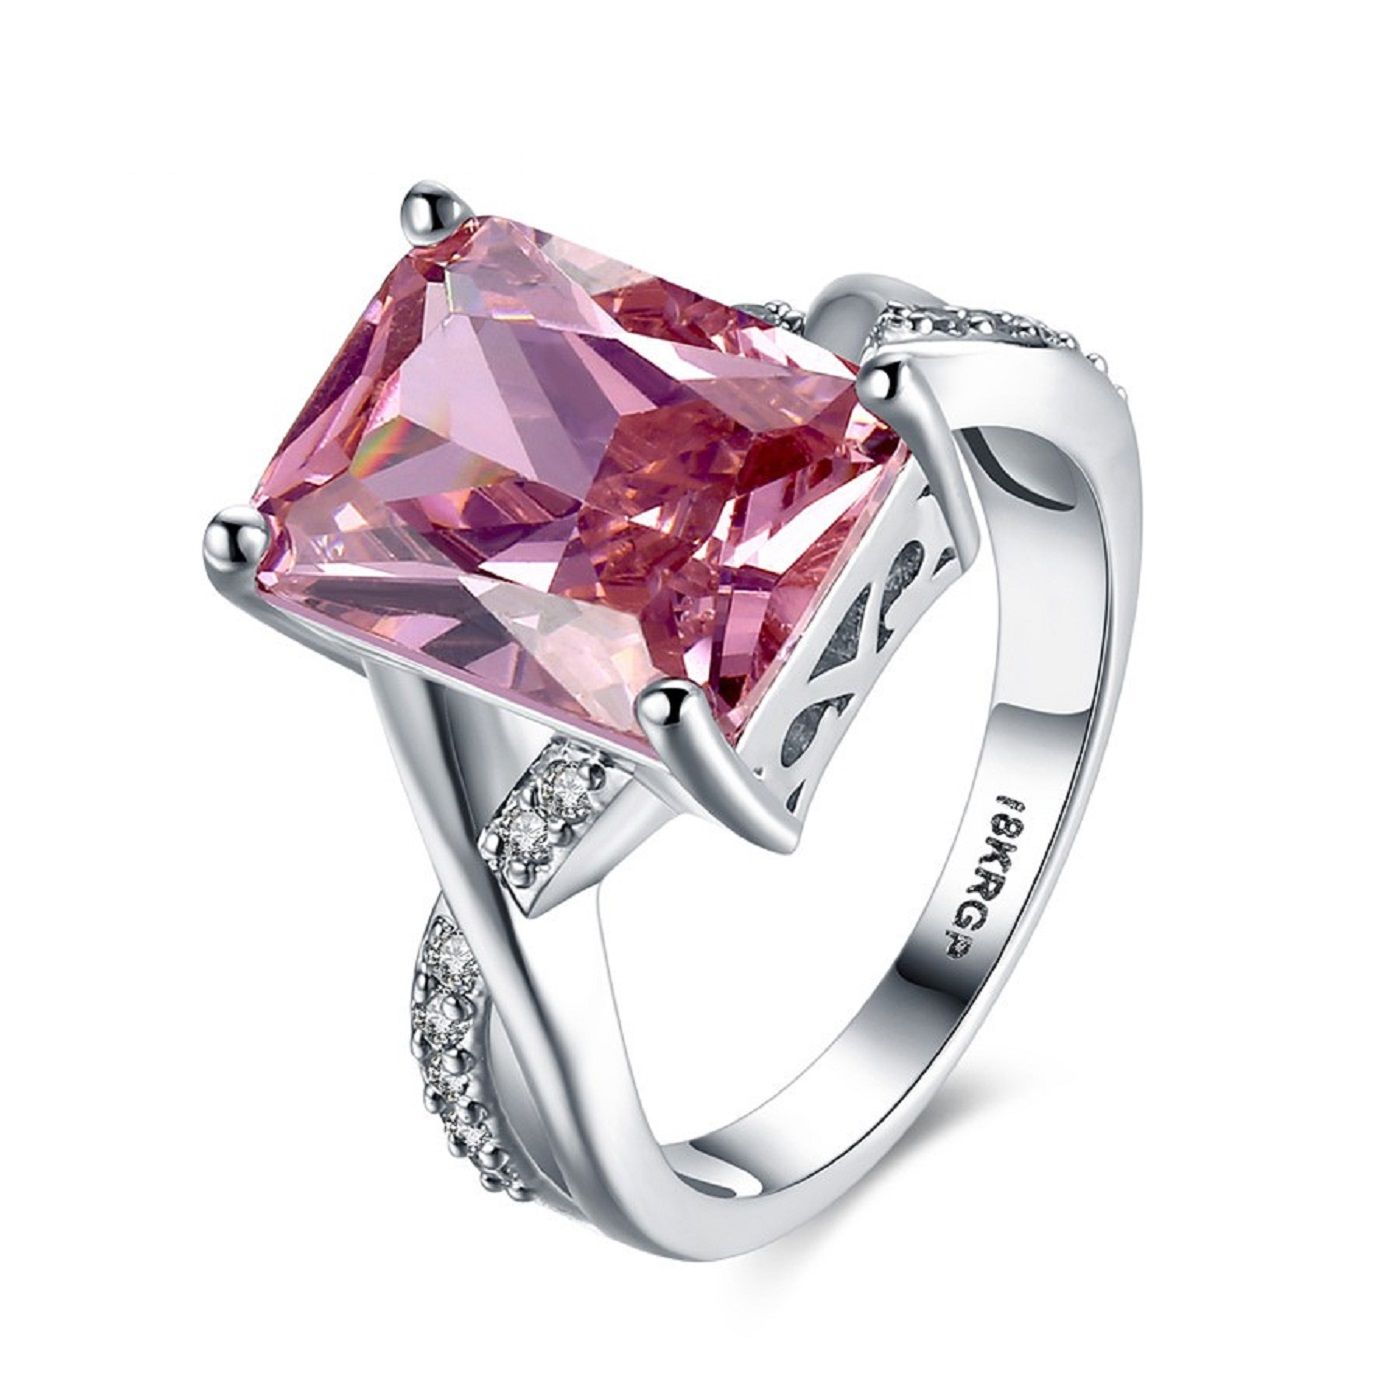 How Much Is A Pink Argyle Diamond Worth?– Springfield Jewellers